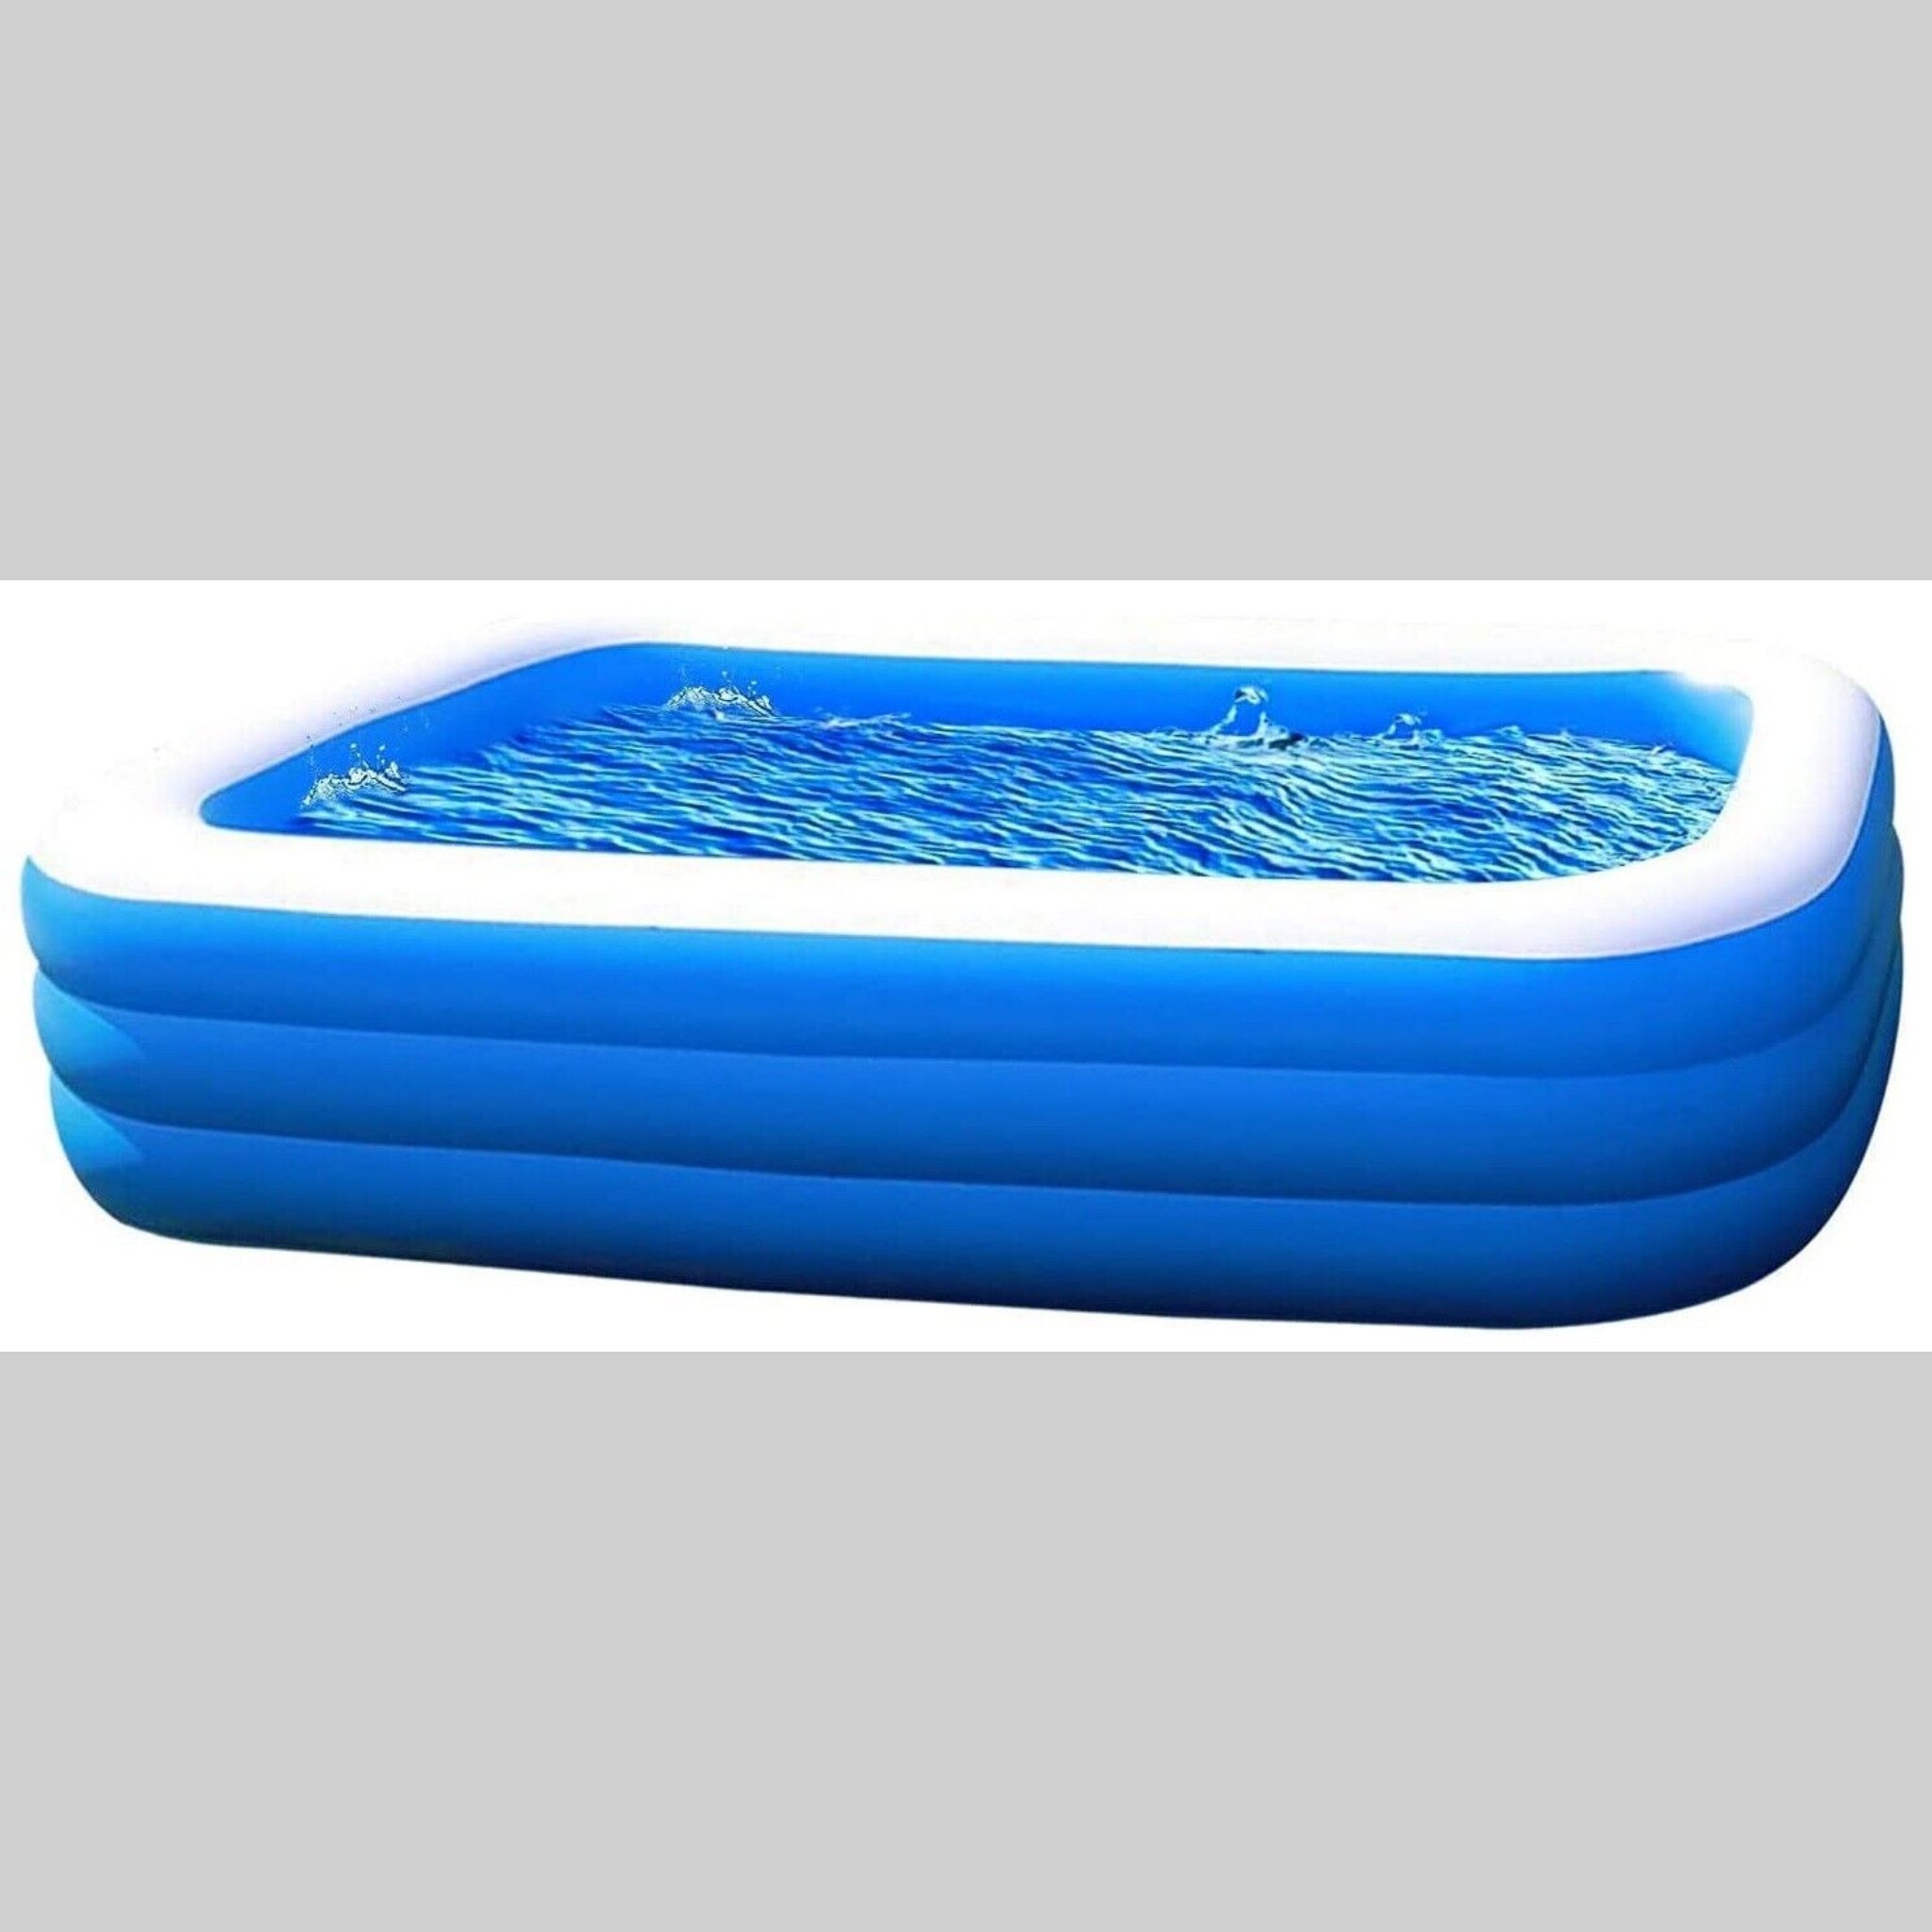 Beclen Harp Giant Inflatable Rectangular Paddling Swimming Pool For Summer/Outdoor Family Fun/Relax